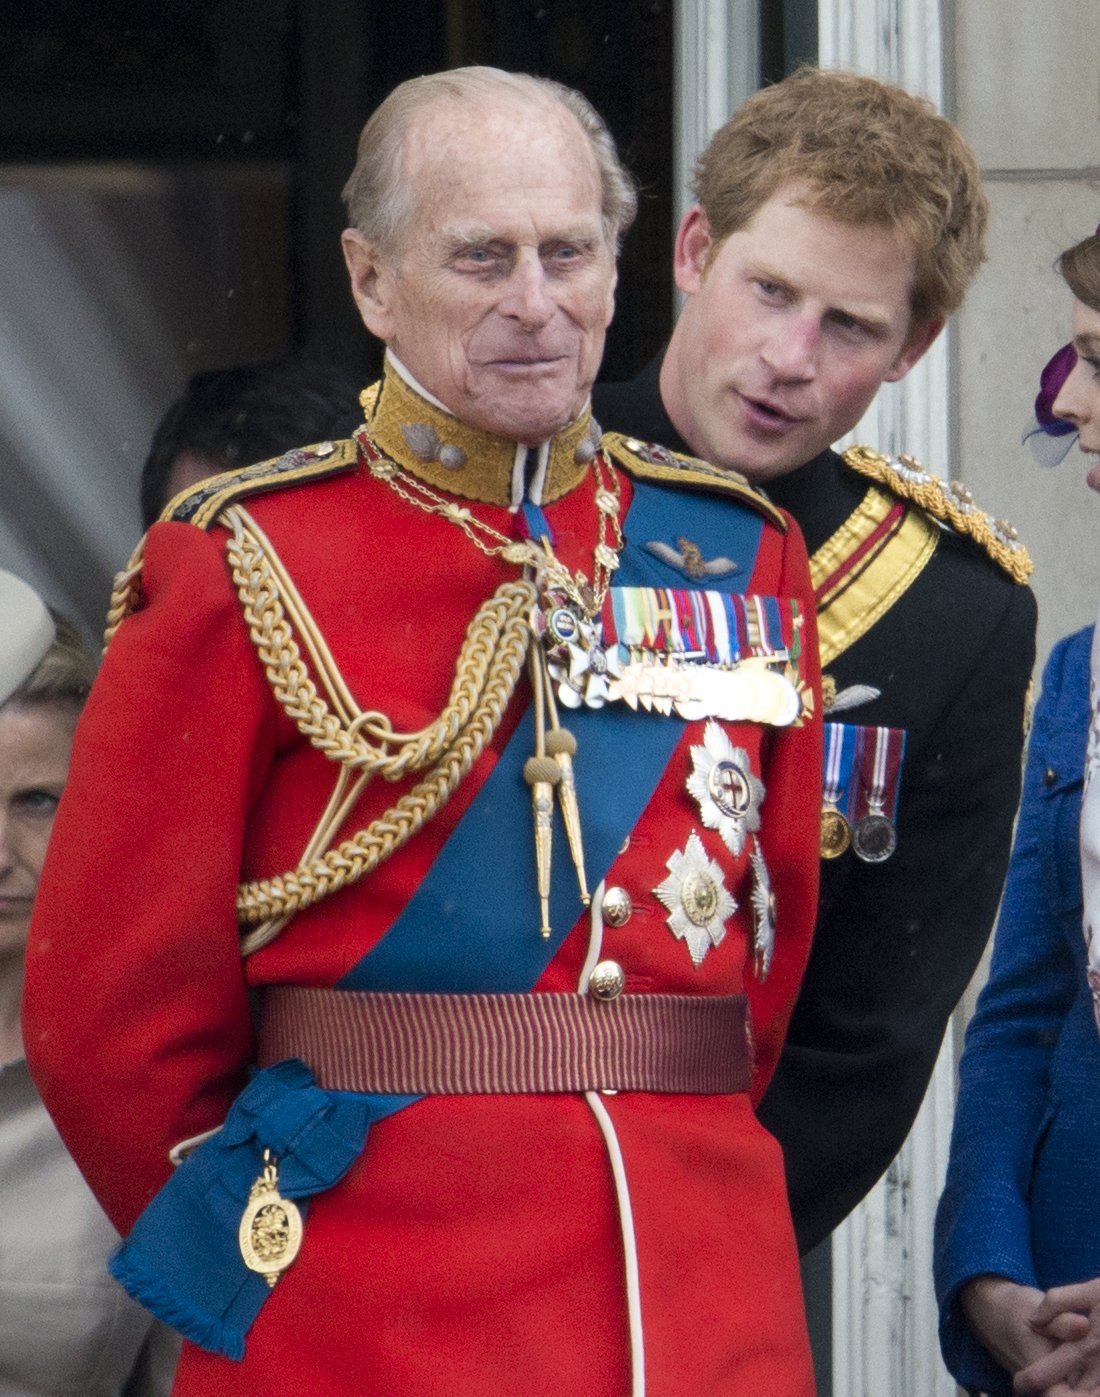 Prince Harry and Prince Philip, Duke Of Edinburgh, attending the Trooping the Colour Ceremony in London on June 16, 2012 | Source: Getty Images 